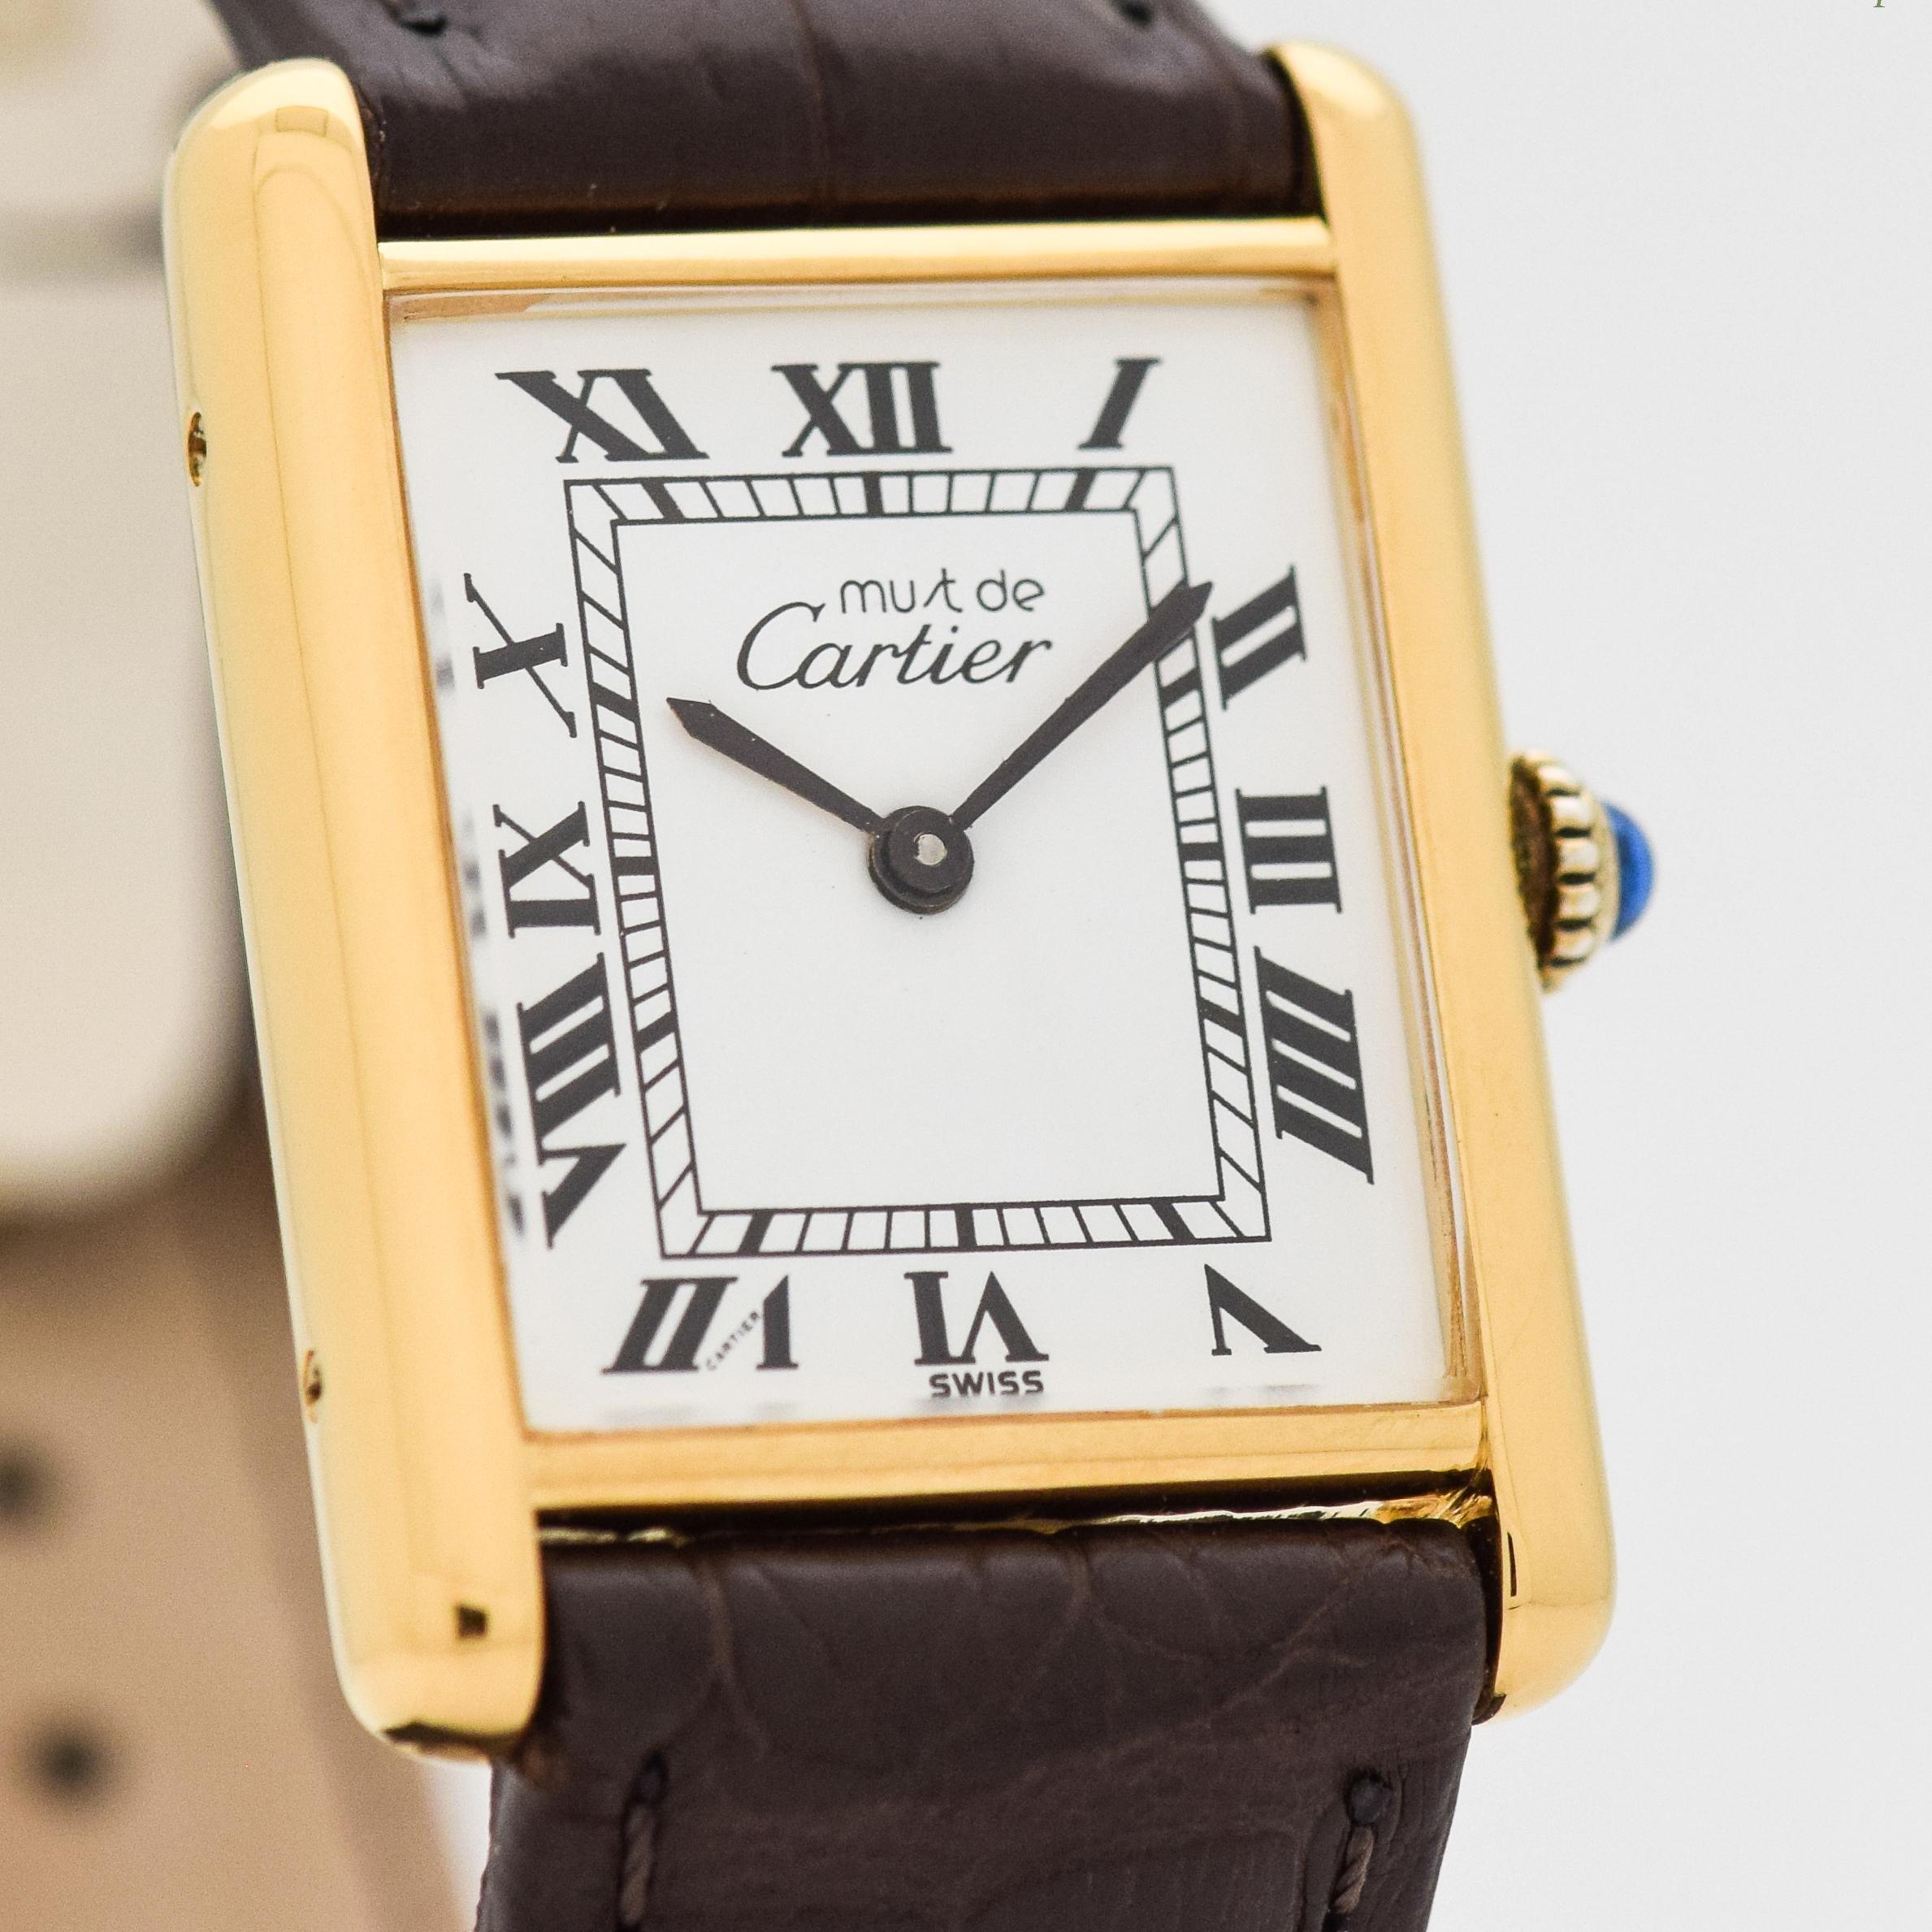 1990's era Cartier Tank Must de Men's Sized Watch. 18K Yellow Gold plated over Sterling Silver case. White dial with black-colored, Roman numerals. Powered by a 17-jewel, manual caliber ETA movement. 23mm x 30mm lug to lug (0.91 in. x 1.18 in.) -